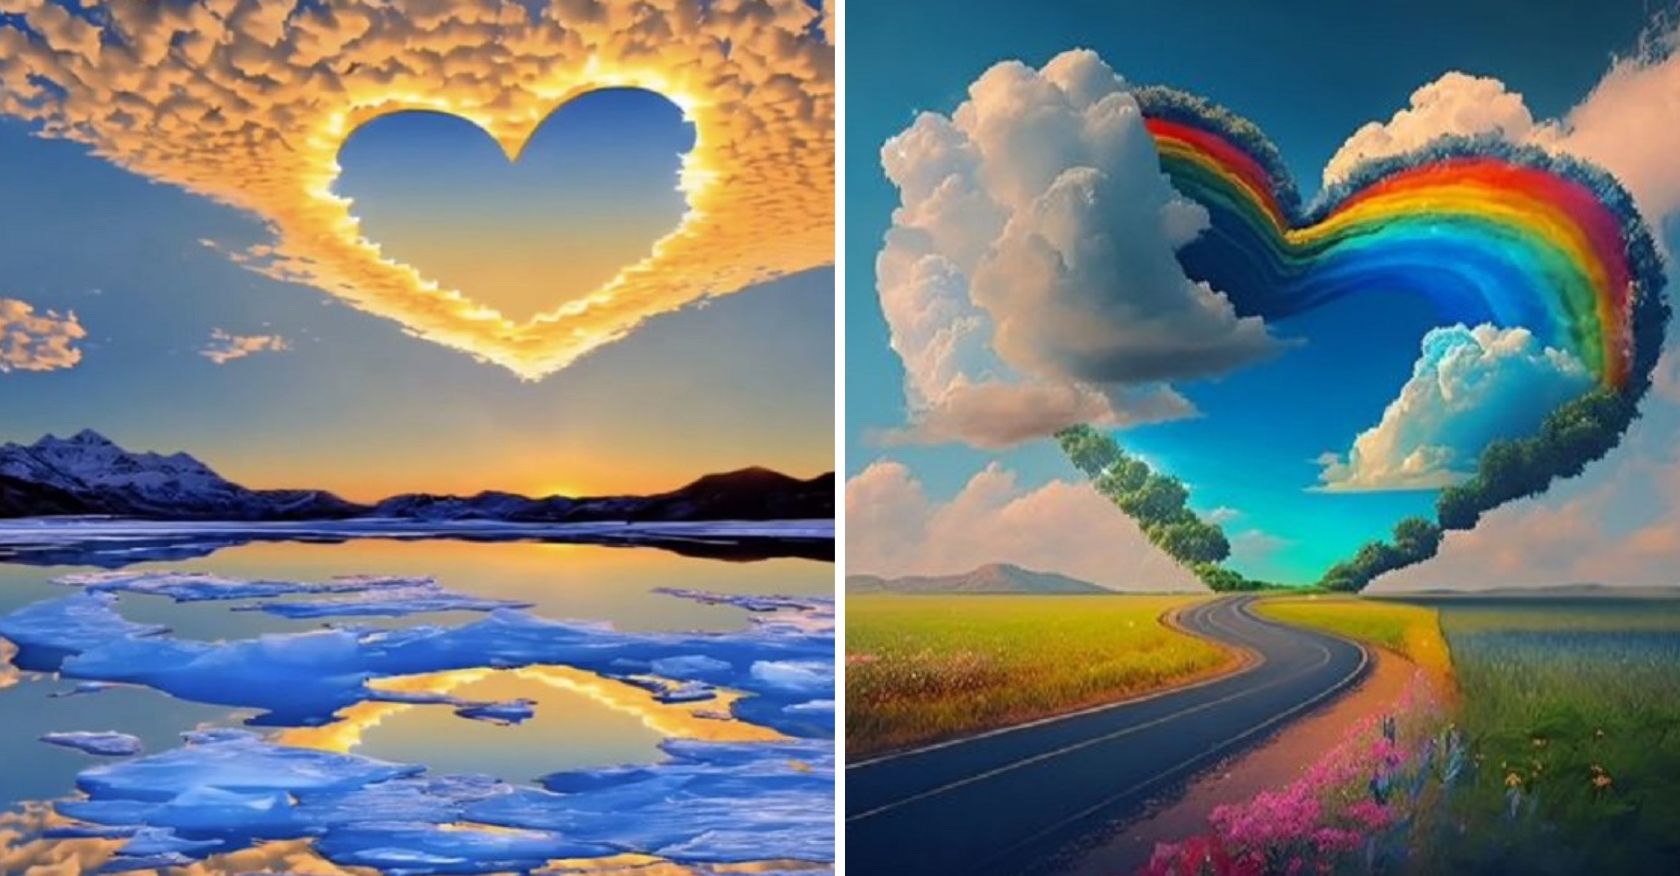 Experience a Magical Adventure to an Alternate World: Where Heart-Shaped Clouds and Romance Await You